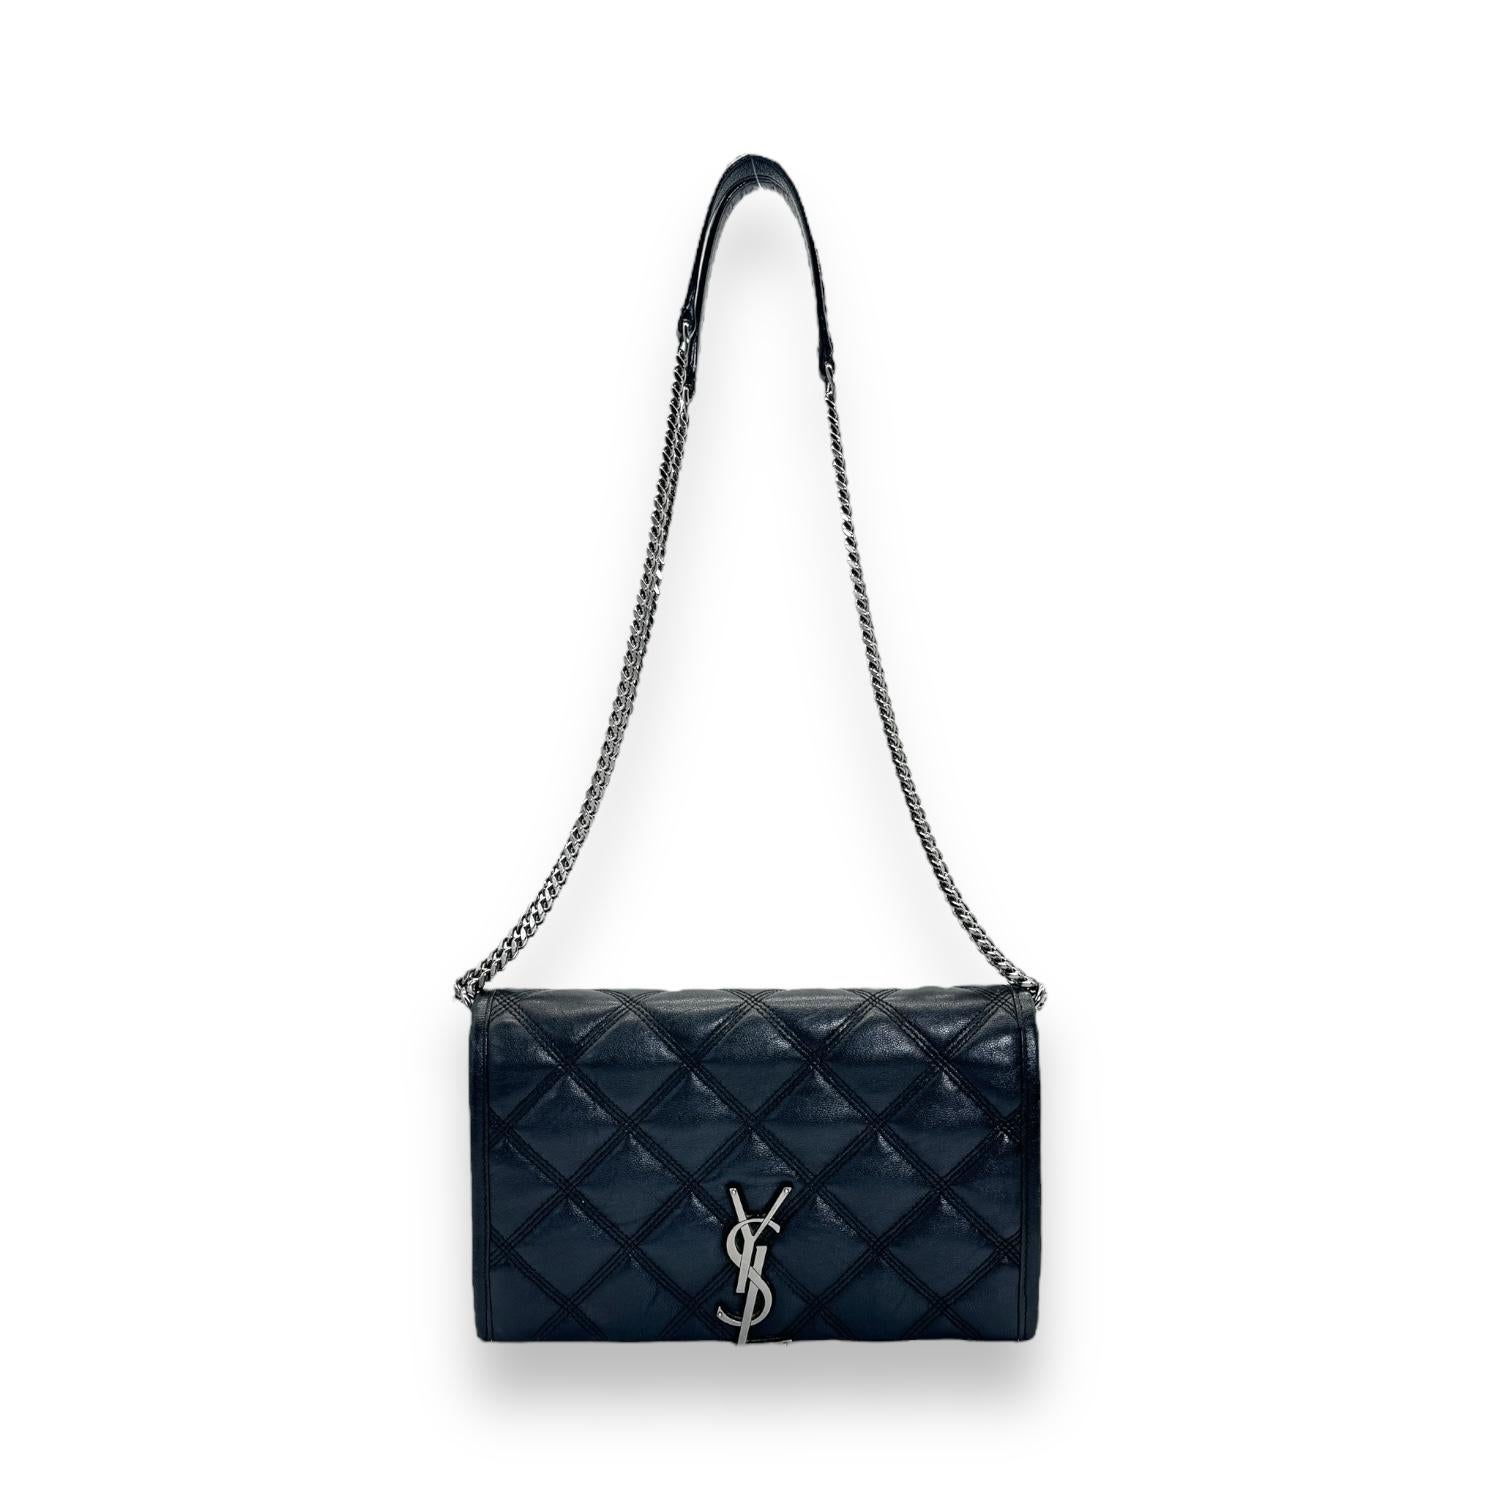 Saint Laurent YSL Saint Laurent Becky Quilted Wallet on Chain in black. The bag features polished silver-tone hardware, chain shoulder straps and a YSL emblem on the front flap. The flap opens to a black leather interior with zipper and patch